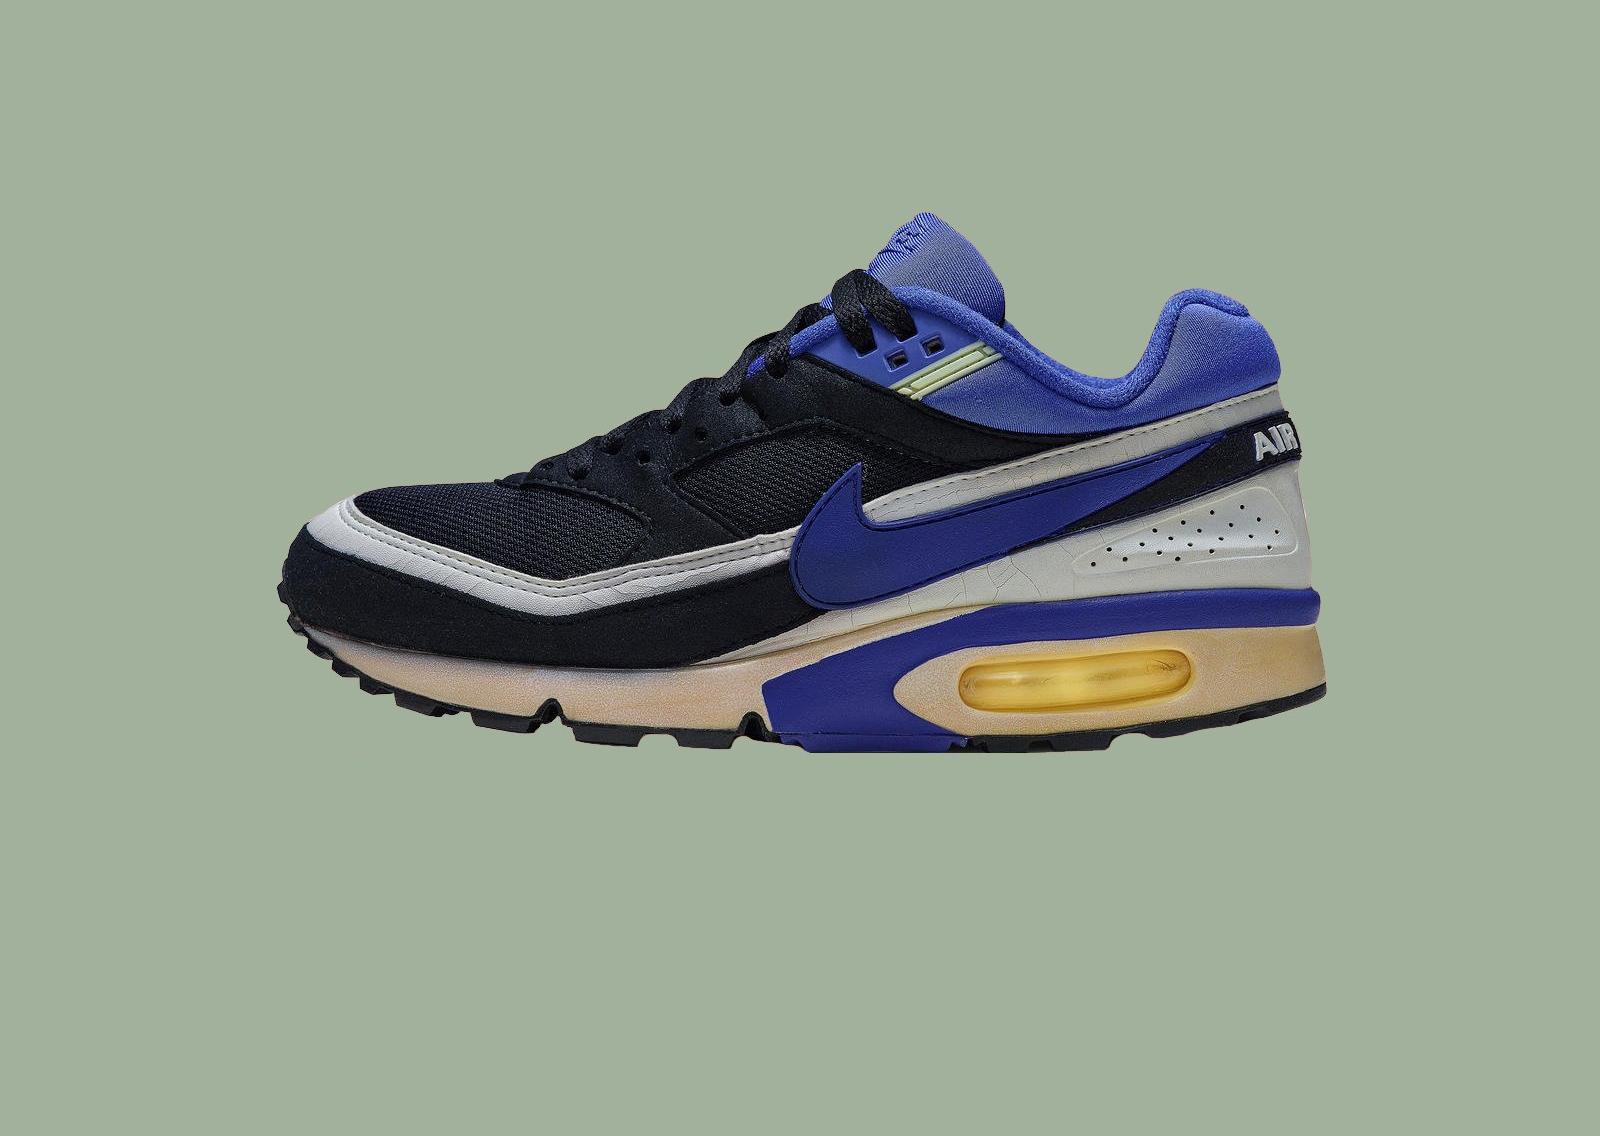 The History and Evolution of Nike’s Air Max Line